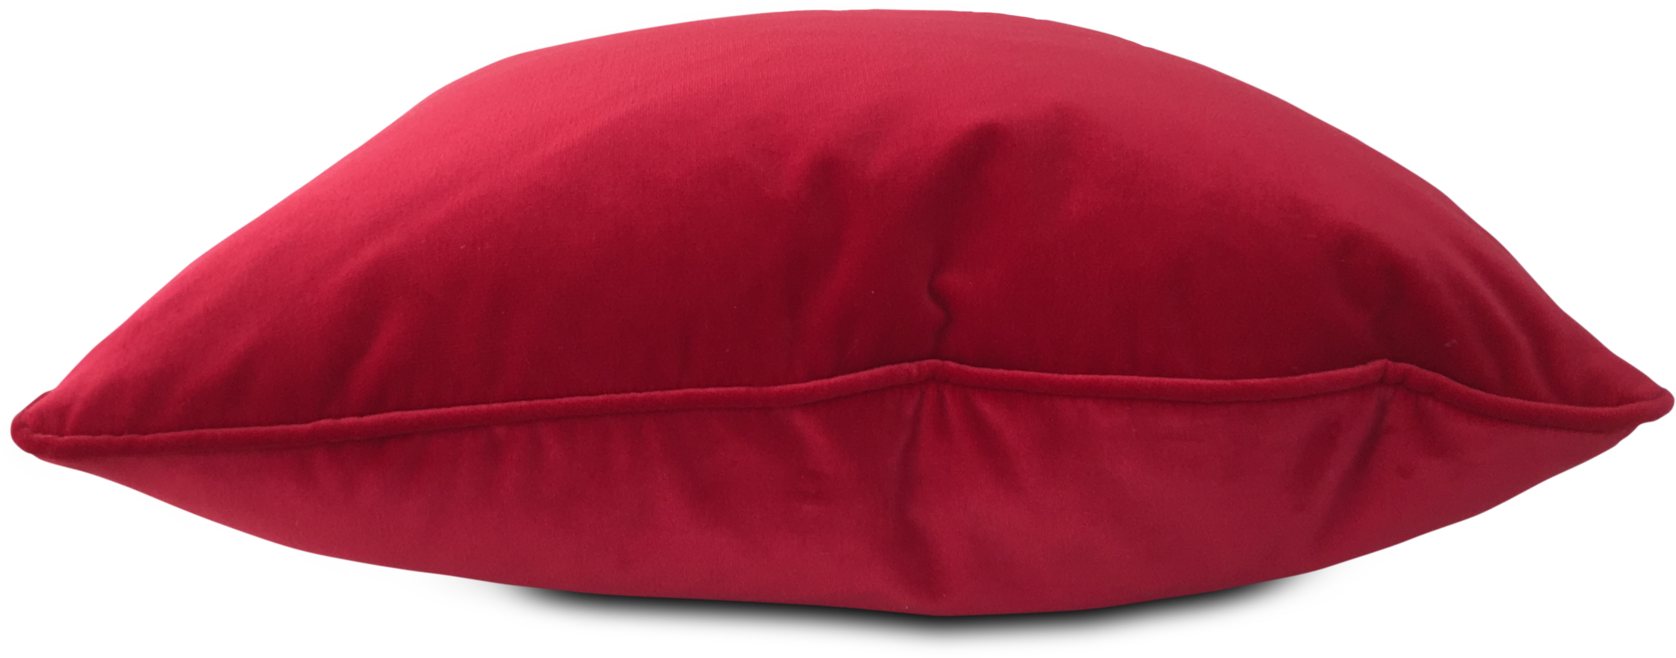 Red Velvet Cushion Texture PNG